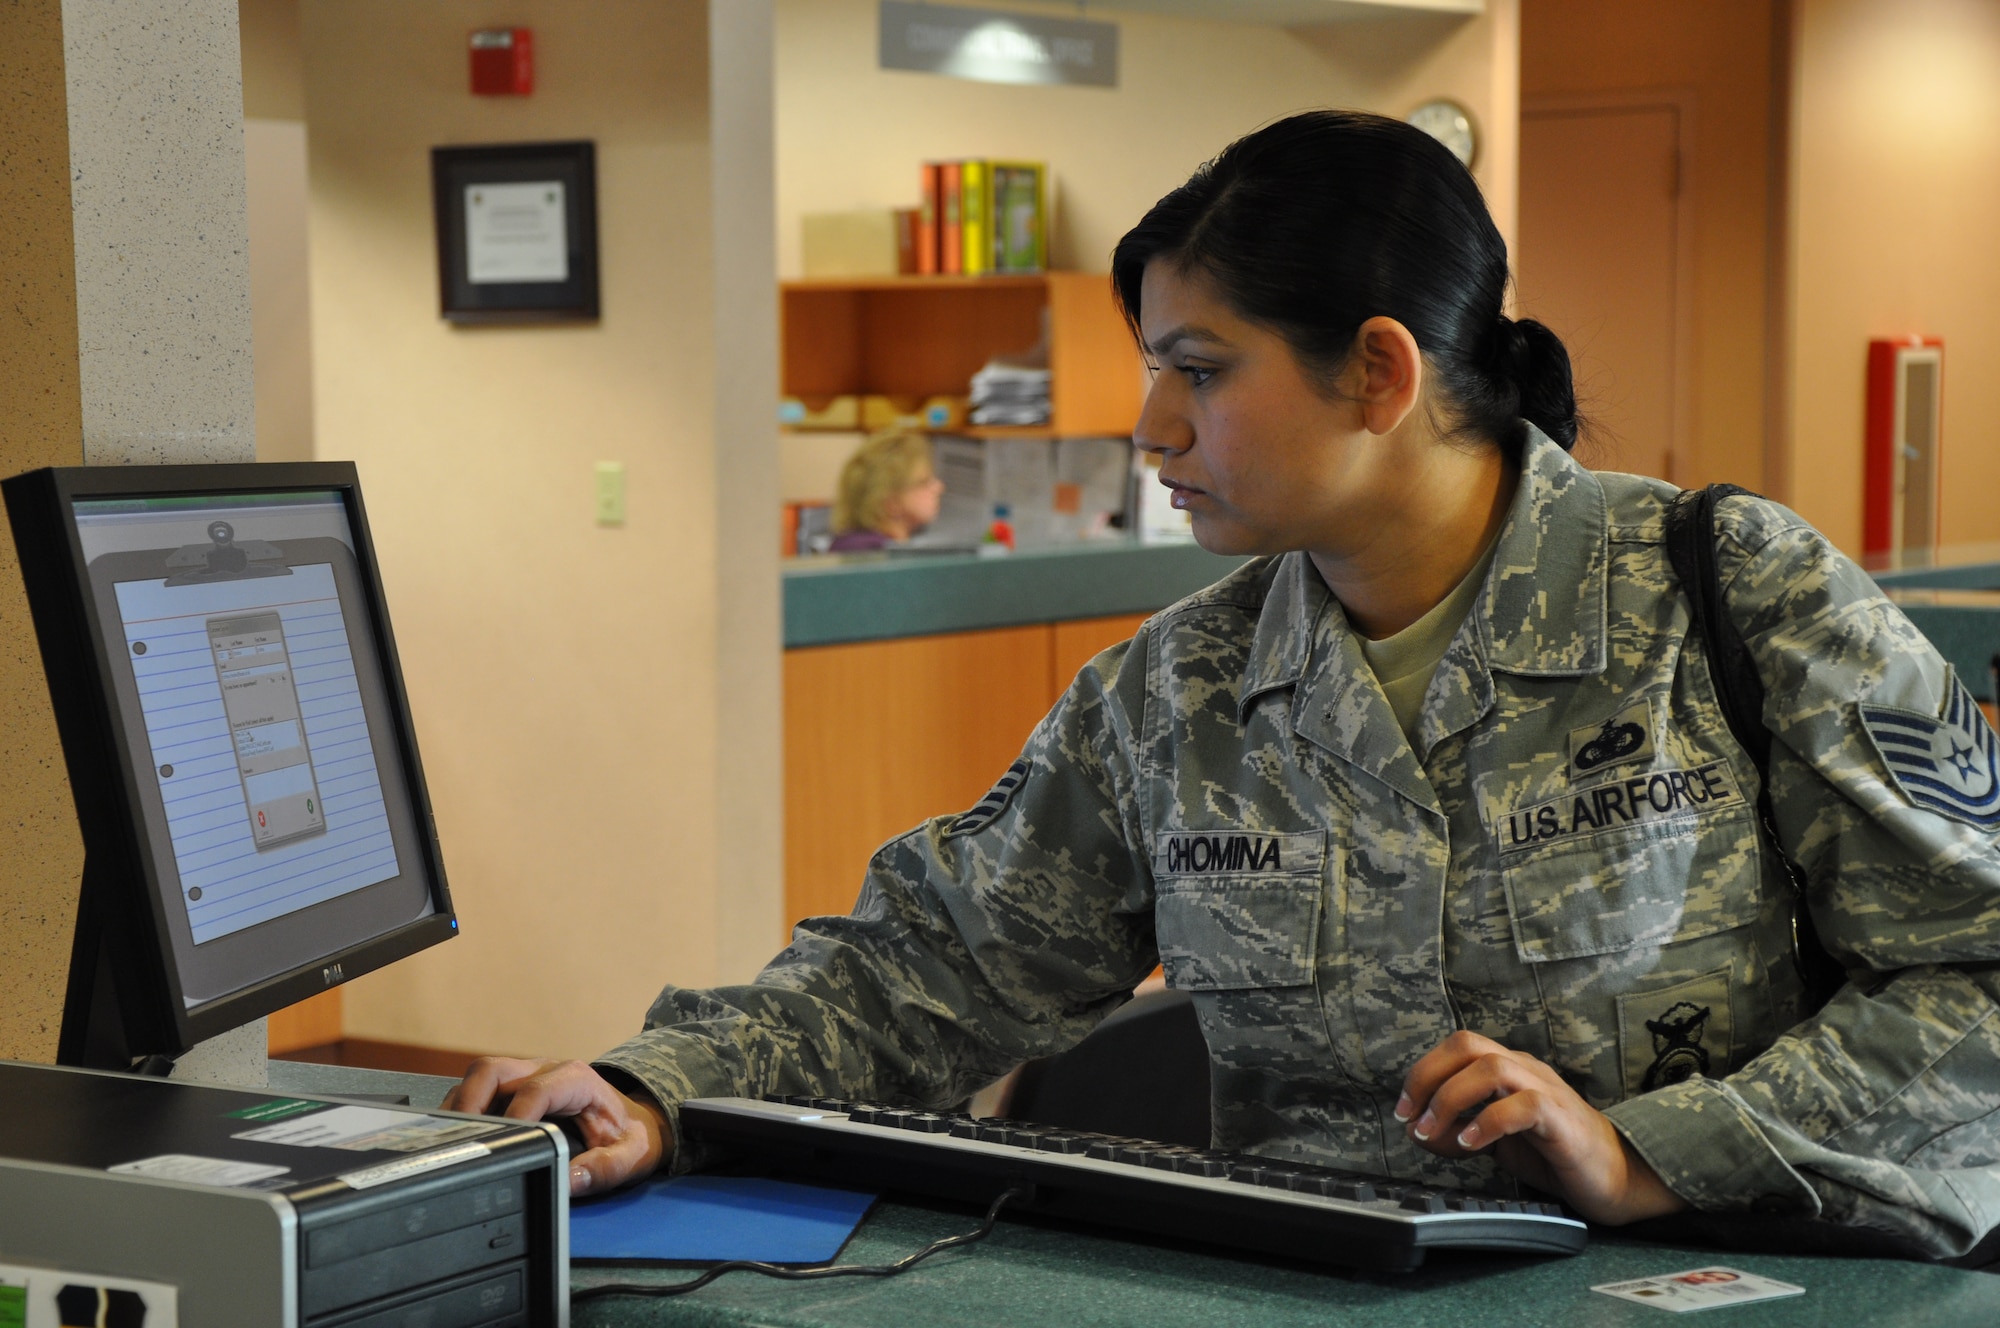 Tech. Sgt. Cristina Chomina, 9th Security Forces Squadron, uses a computer at the Administrative Support Flight at Beale Air Force Base, Calif., Jan. 5, 2012. The ASF utilizes computers to reduce customer wait time and improve customer service. (U.S. Air Force photo by Staff Sgt. Robert M. Trujillo)